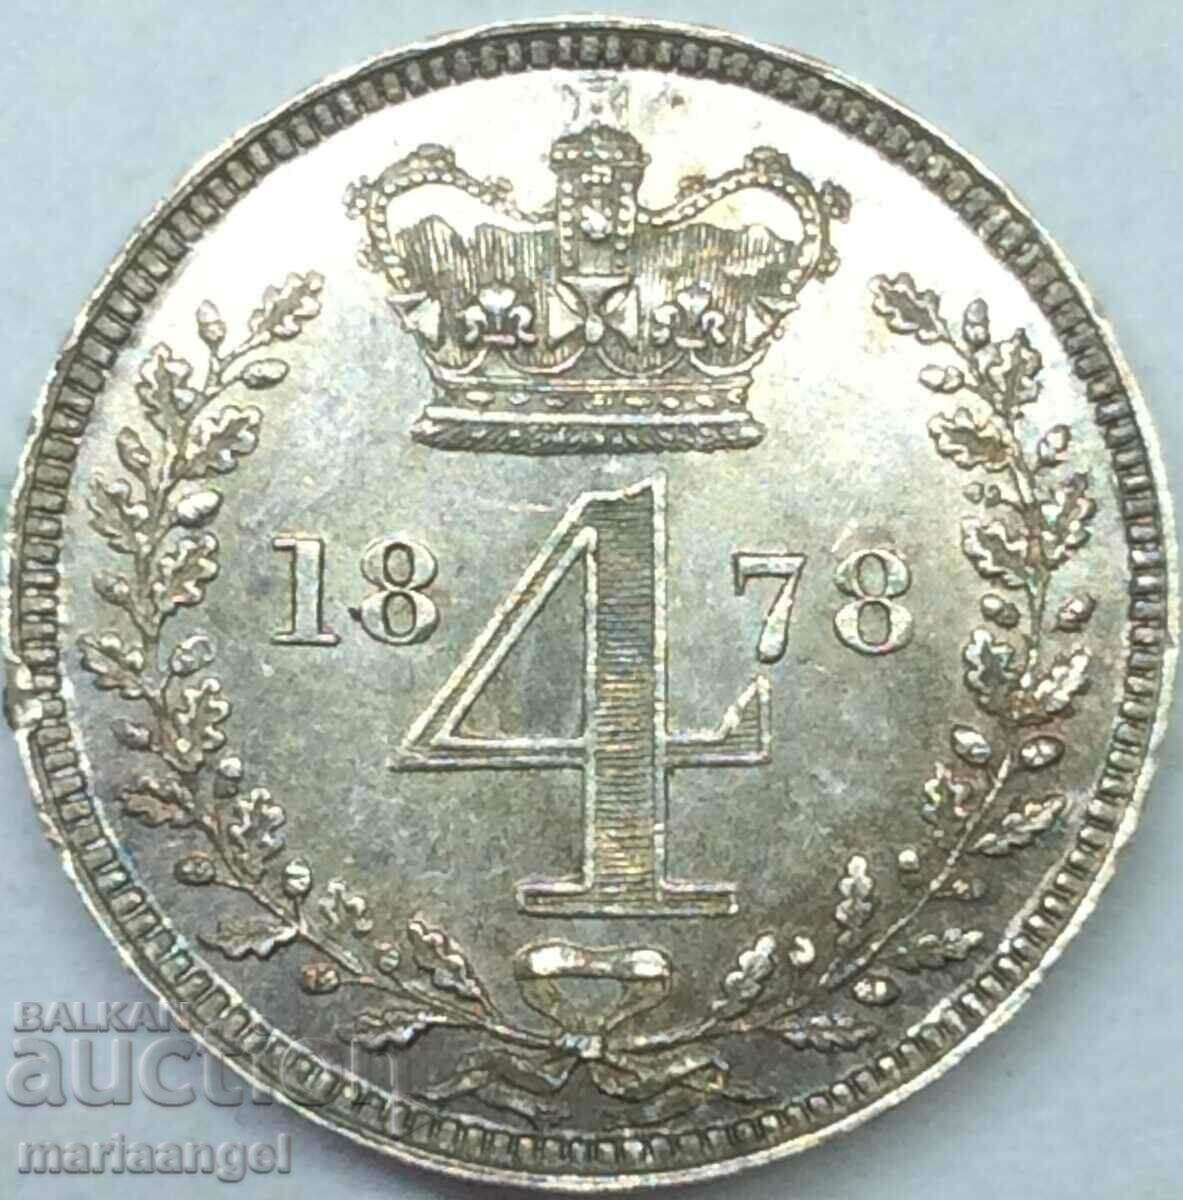 Great Britain 4 Pence 1878 Maundy Victoria Silver - RR